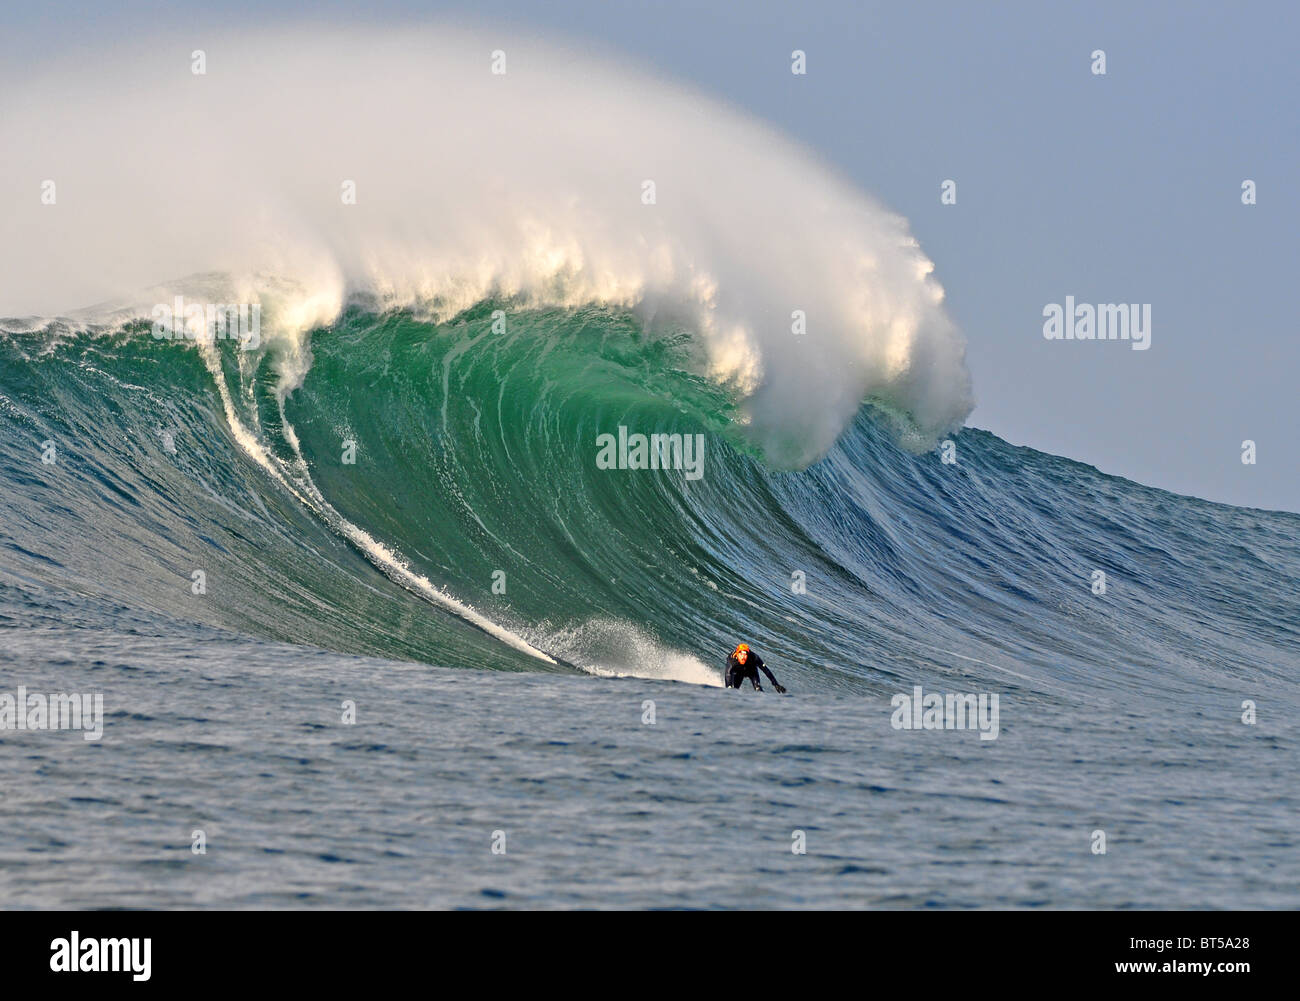 Alistair Mennie surfs a 25 foot wave at the Cliffs of Moher , Co Clare, Ireland Stock Photo